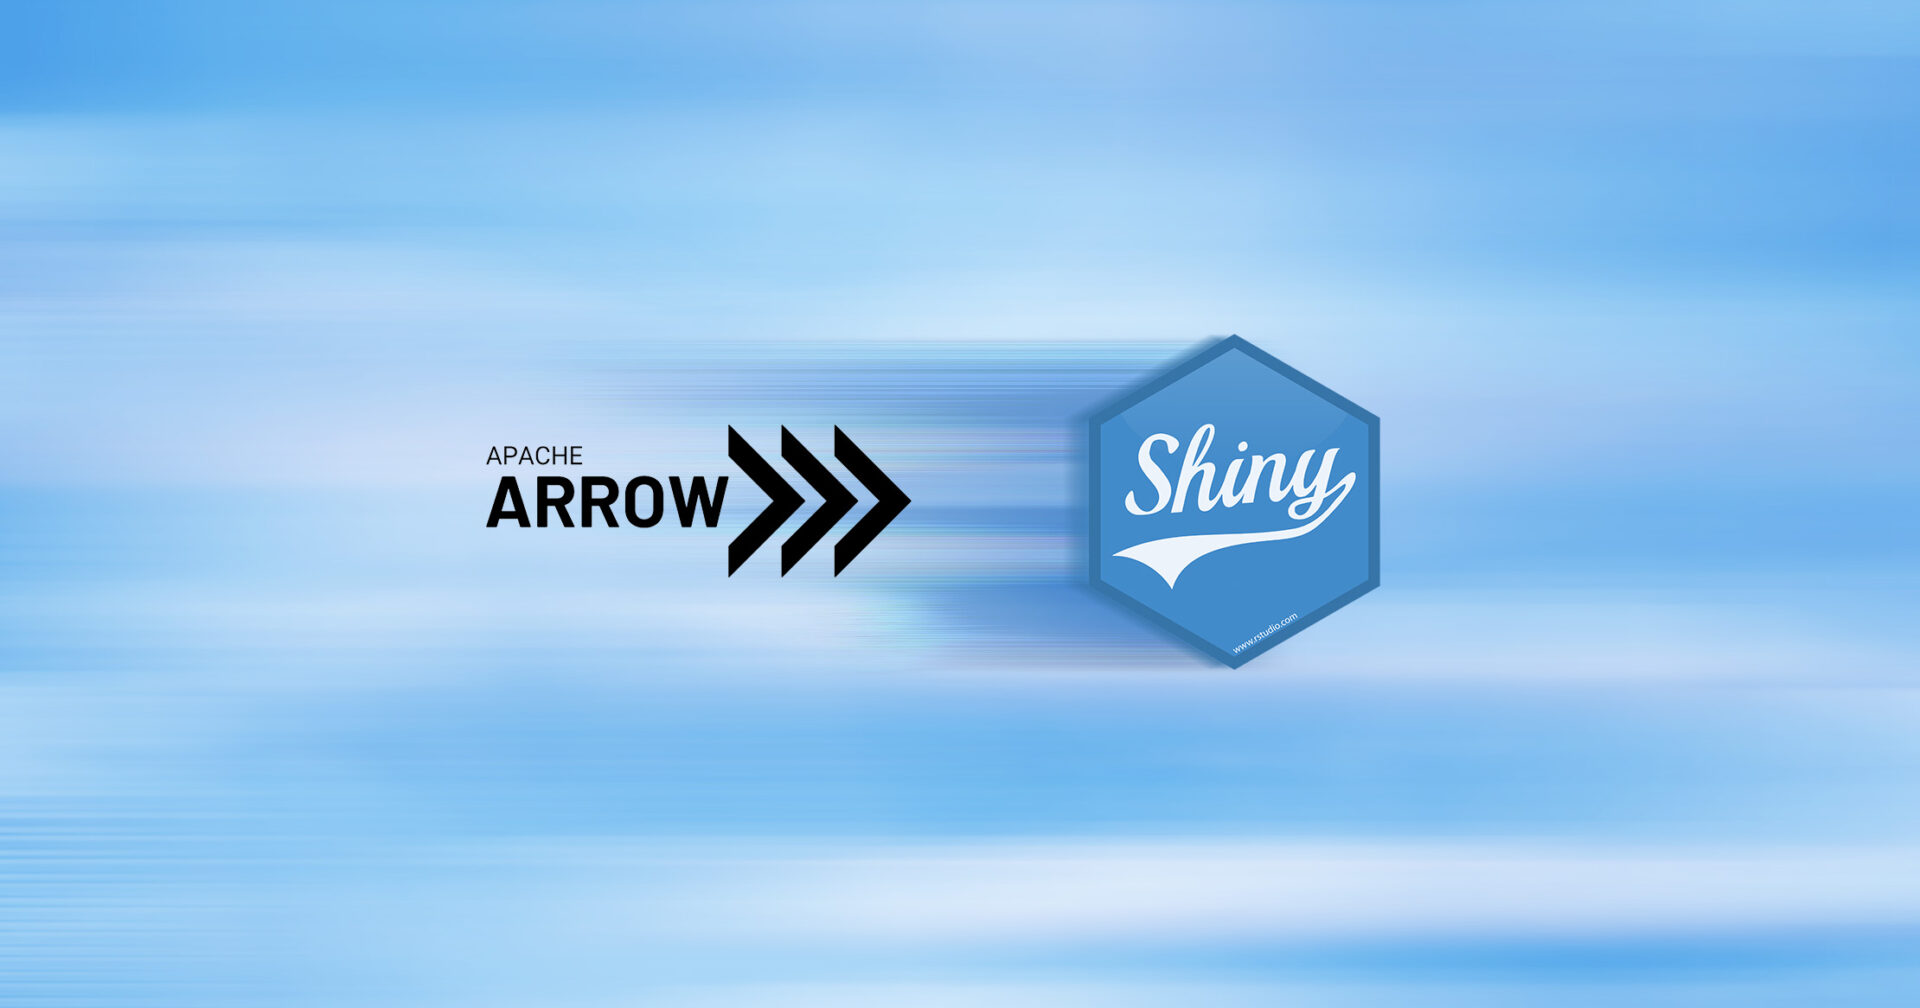 The Apache Arrow logo next to the Shiny package hex sticker, with the Shiny hex looking like it's zooming by.